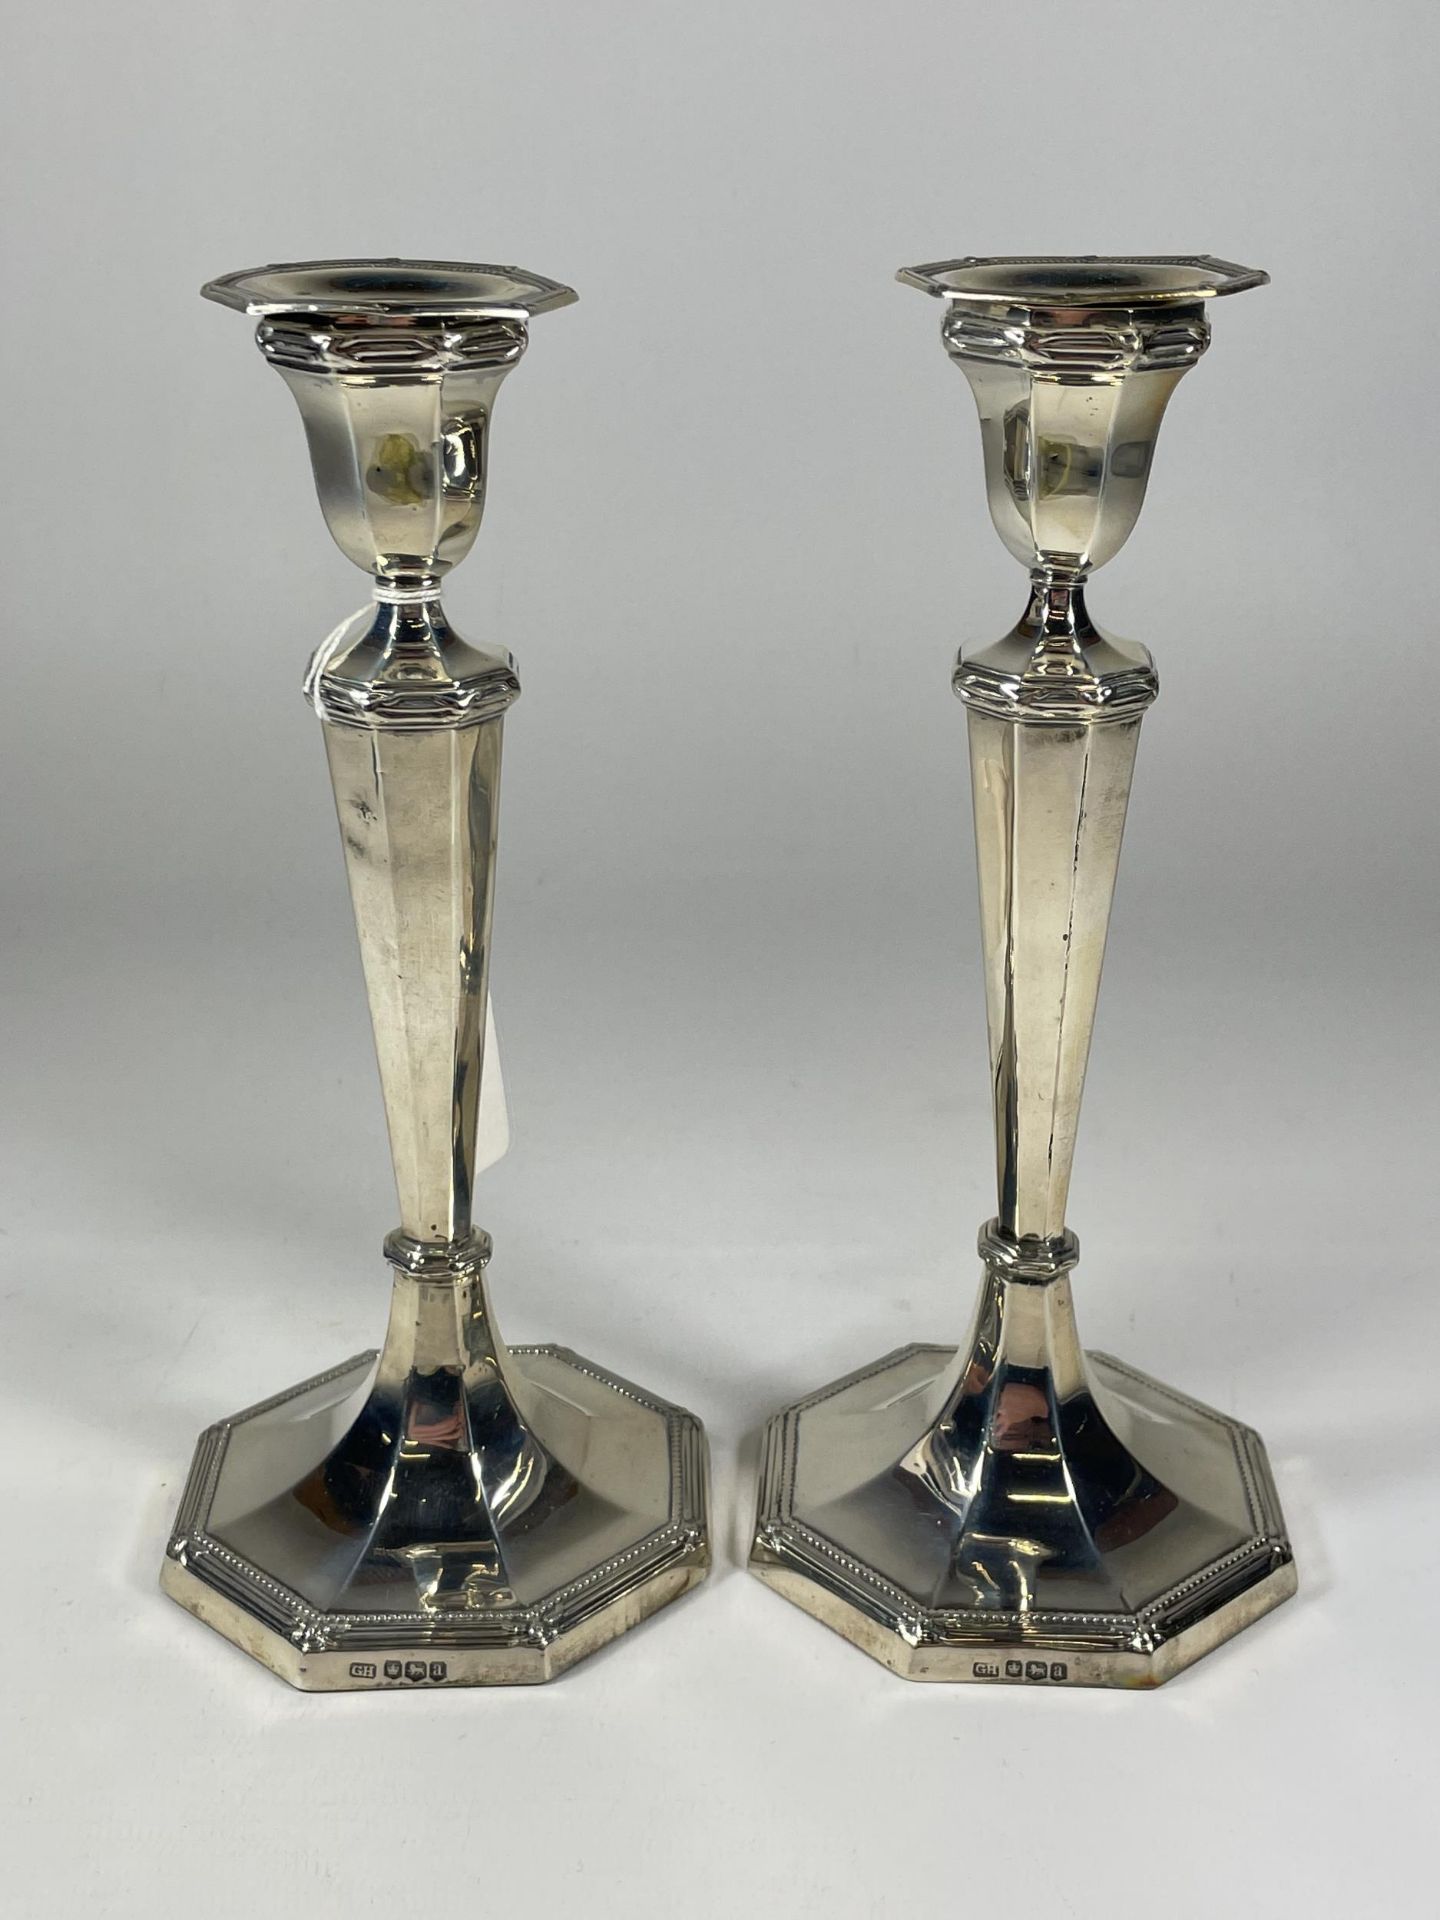 A PAIR OF GEORGE V SILVER CANDLESTICKS, HALLMARKS FOR SHEFFIELD, 1918, MAKERS HARRISON BROTHERS,